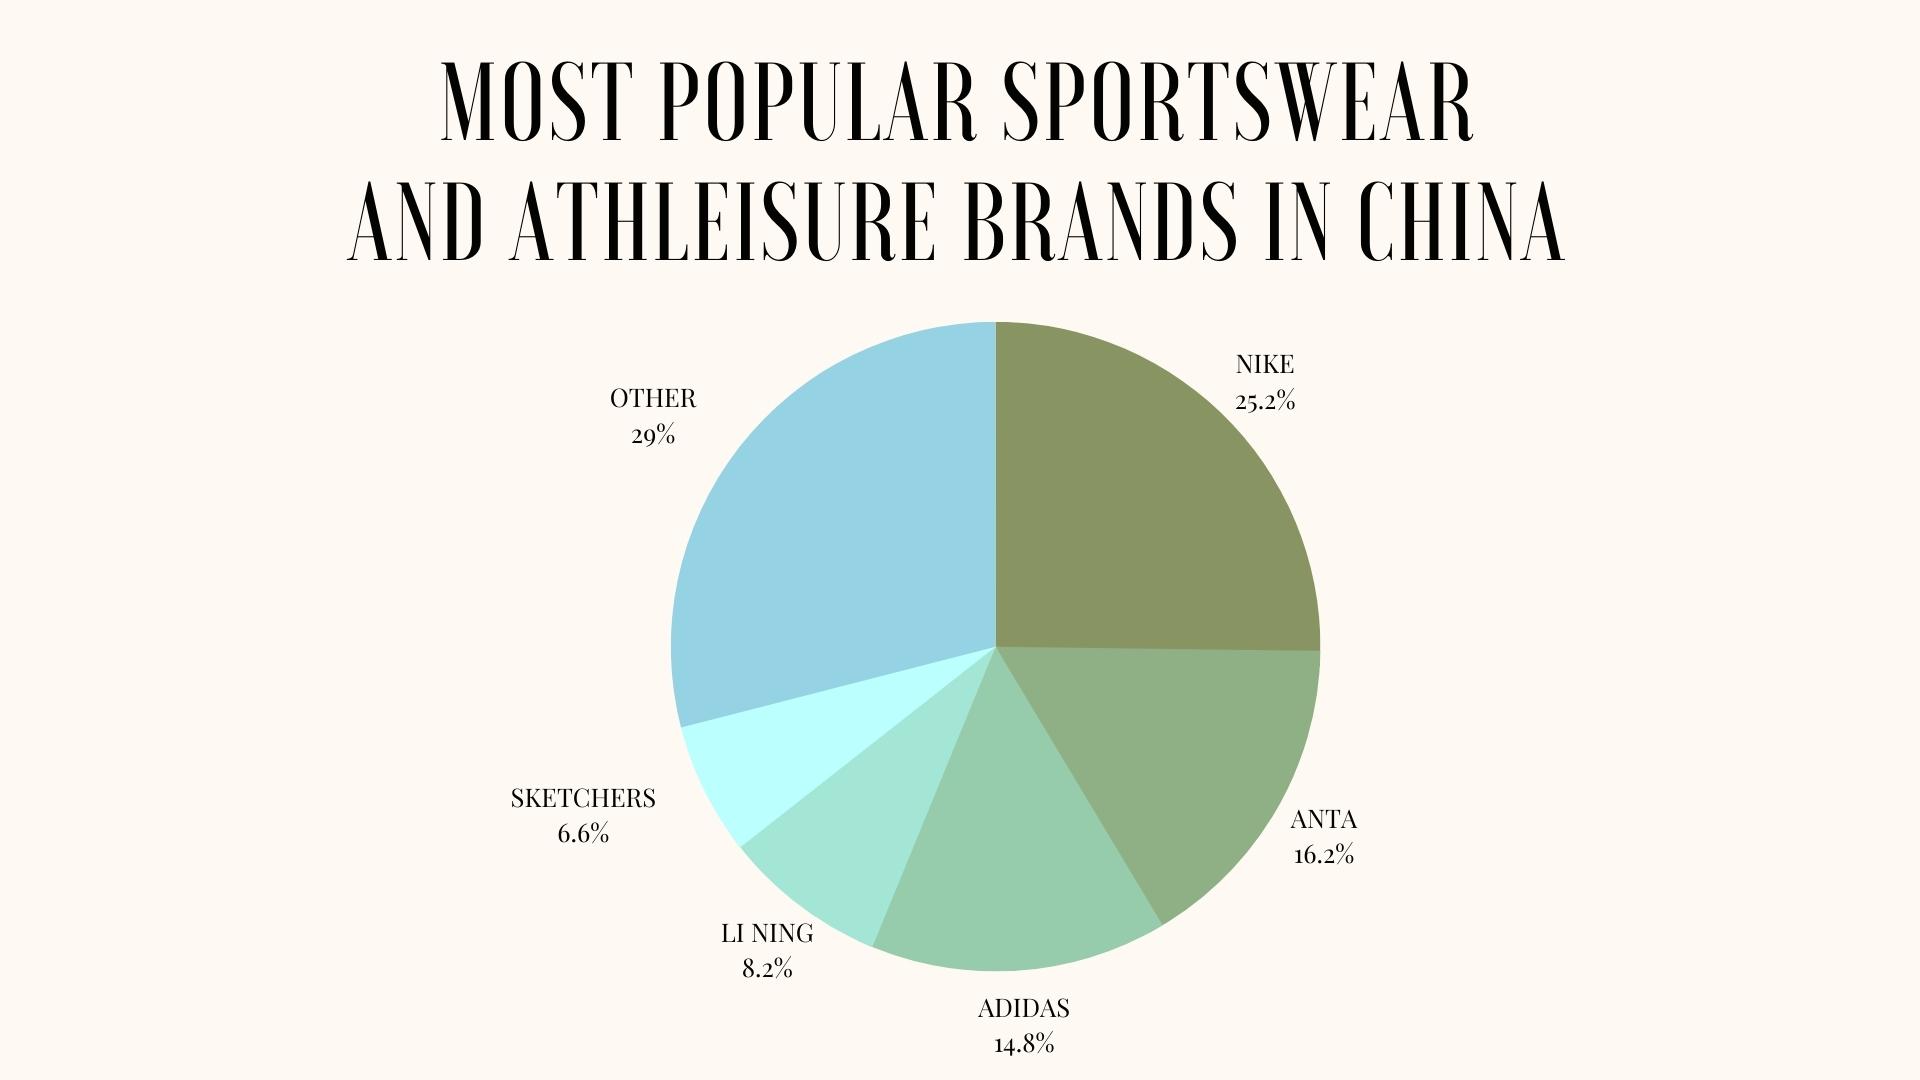 The Athleisure Market in China is Growing with People Turning to